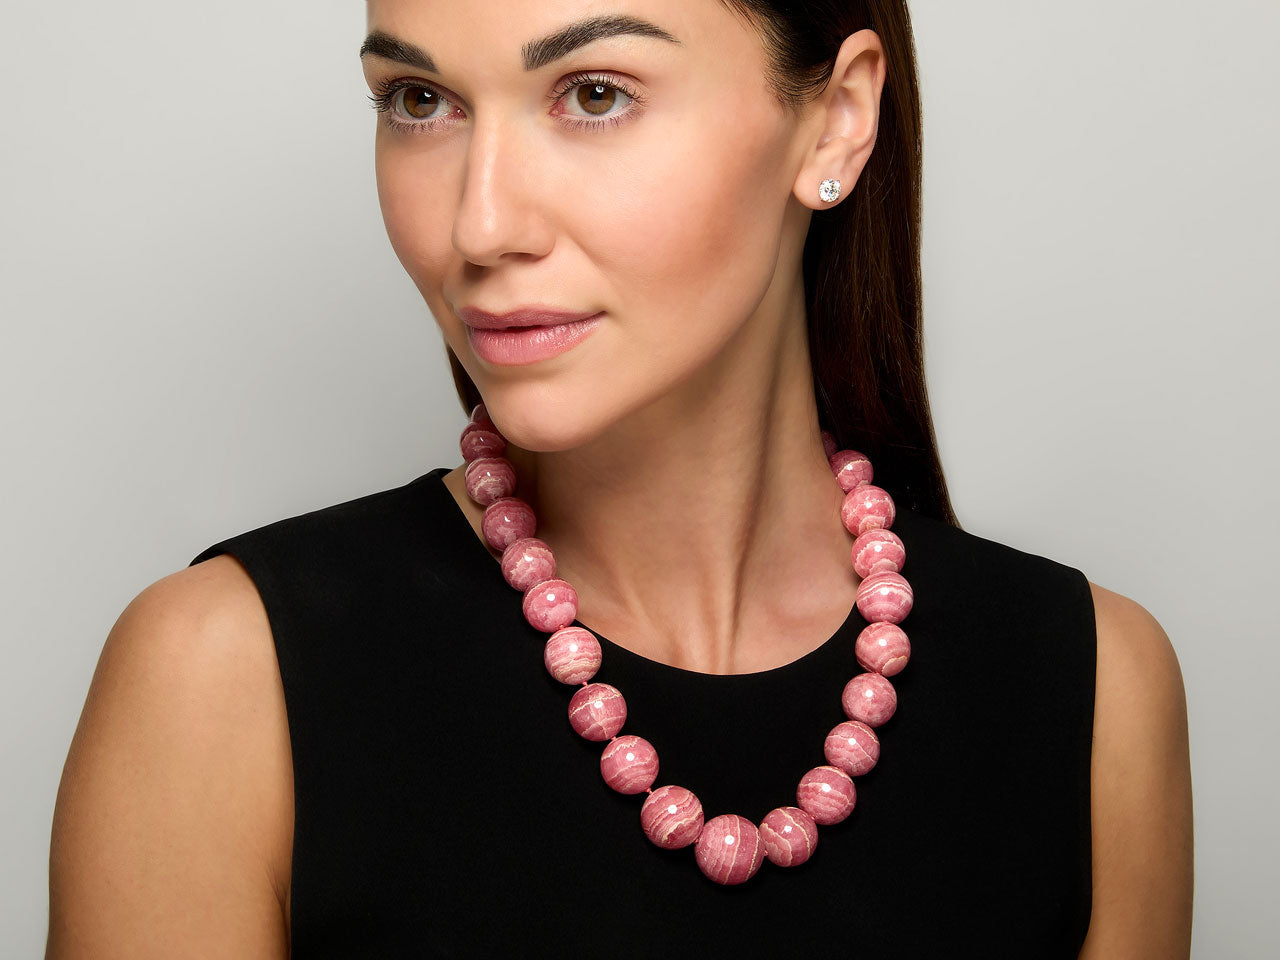 Tiffany & Co. Rhodochrosite Bead Necklace with 18K Gold Clasp